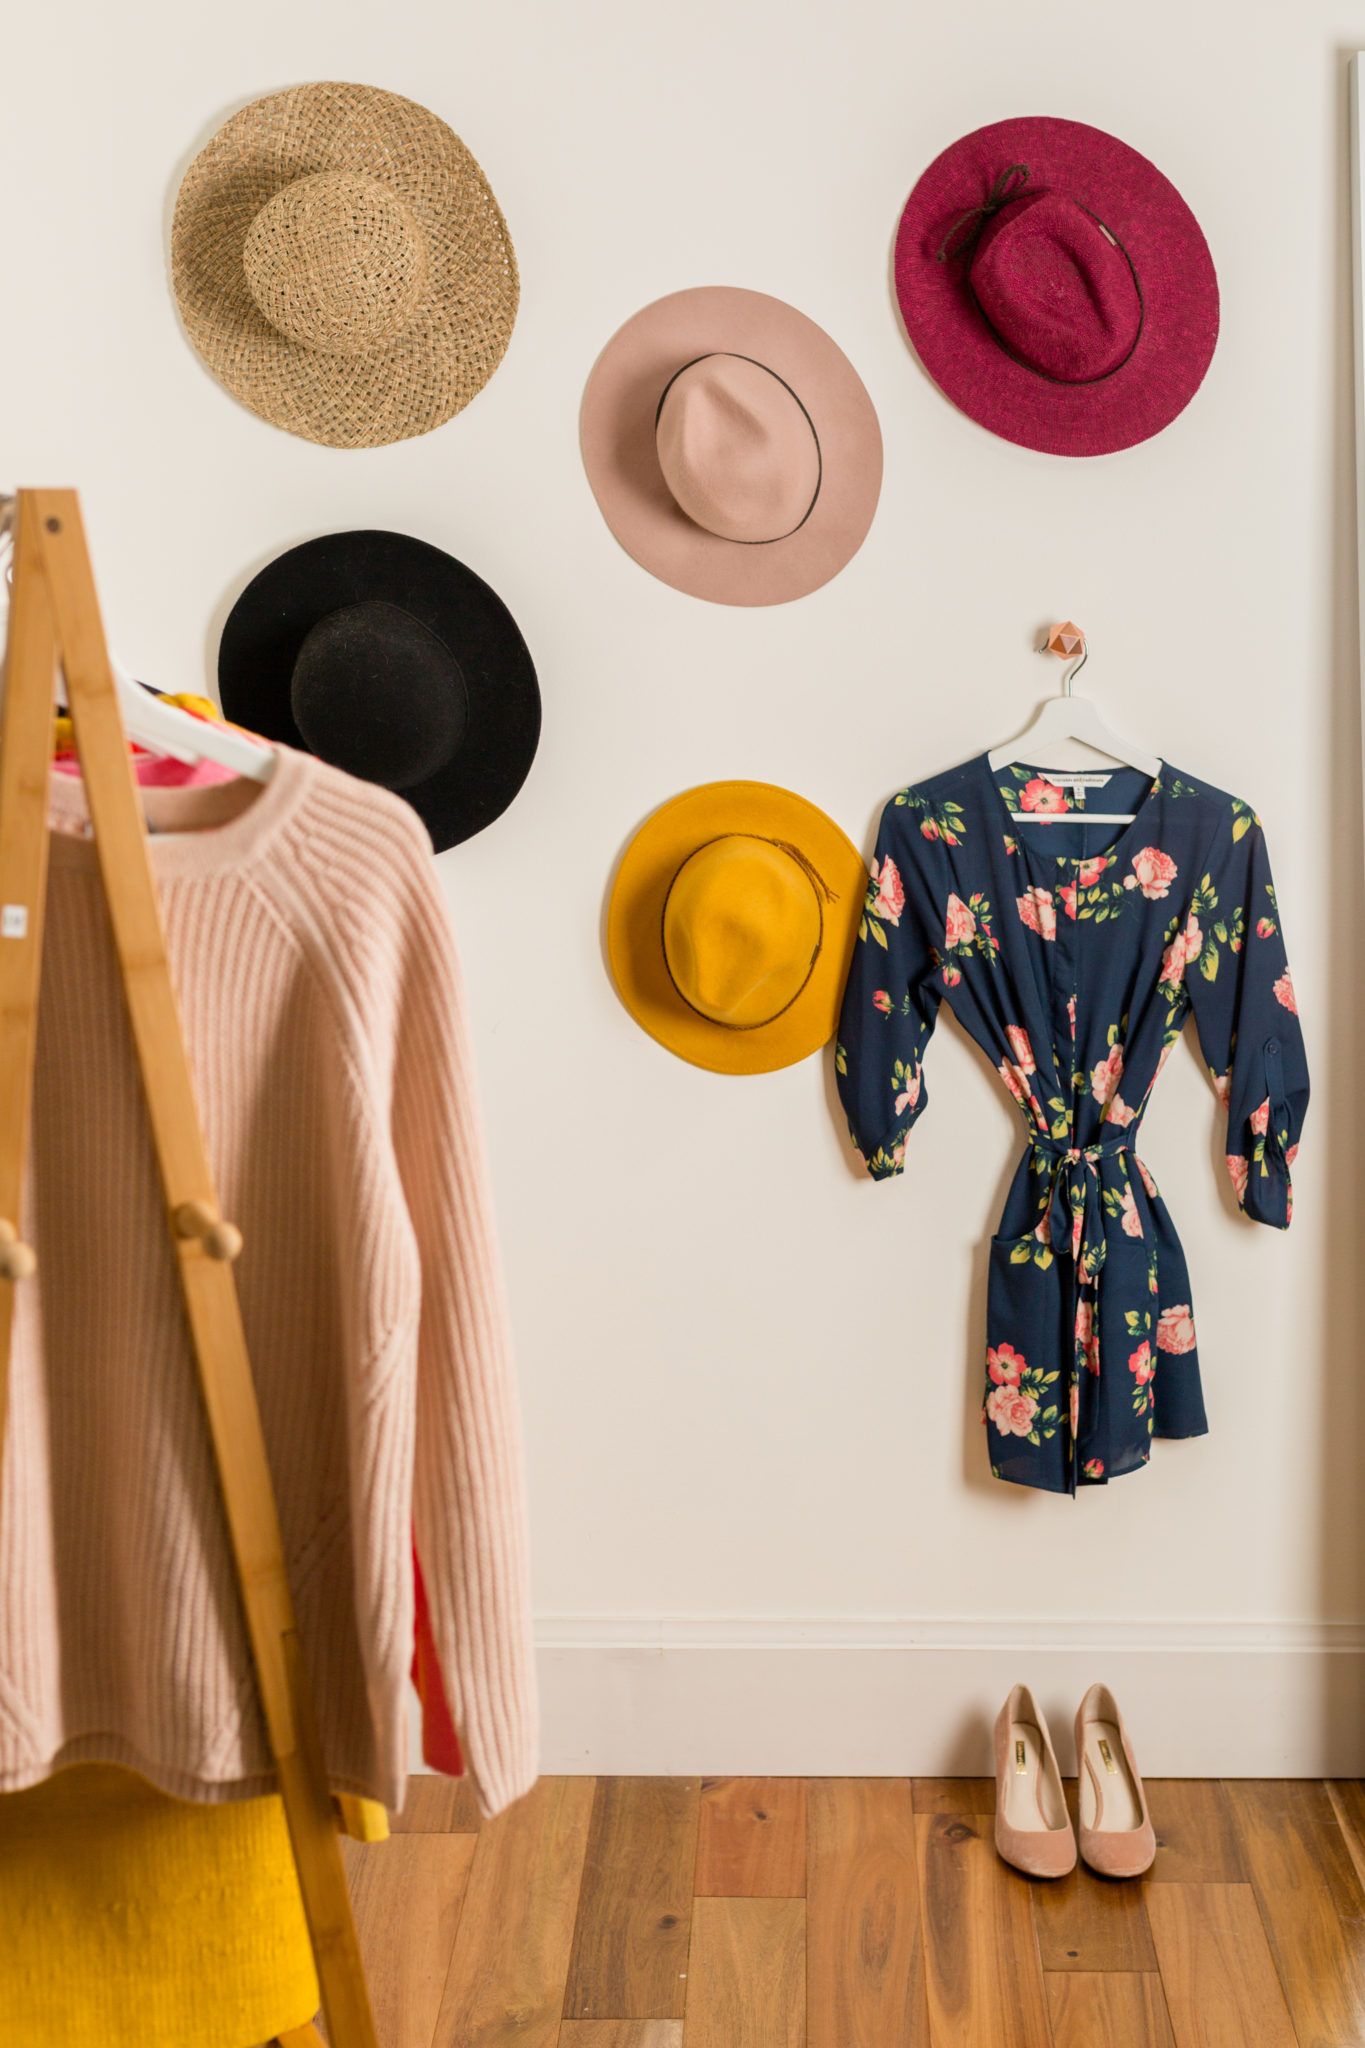 How to organize your clothes | how to hang your hats | hat hooks | hat wall | Dove Invisible Dry Spray Deodorant | how I get out to door quickly on allweareblog.com